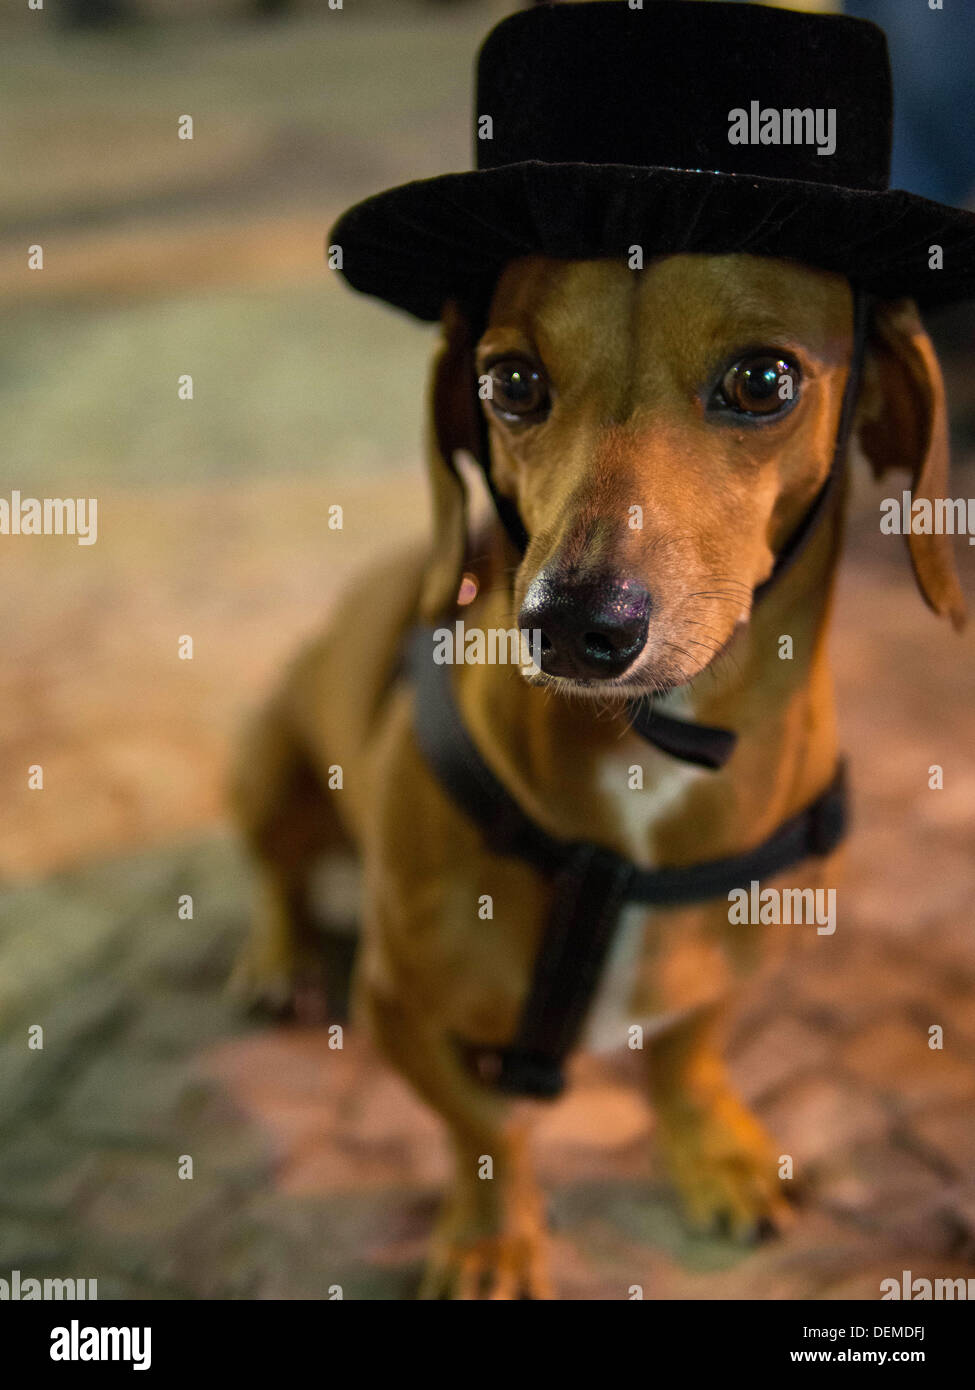 Funny/cute Dachshund dog wearing a top hat posing for a portrait on the street. Stock Photo